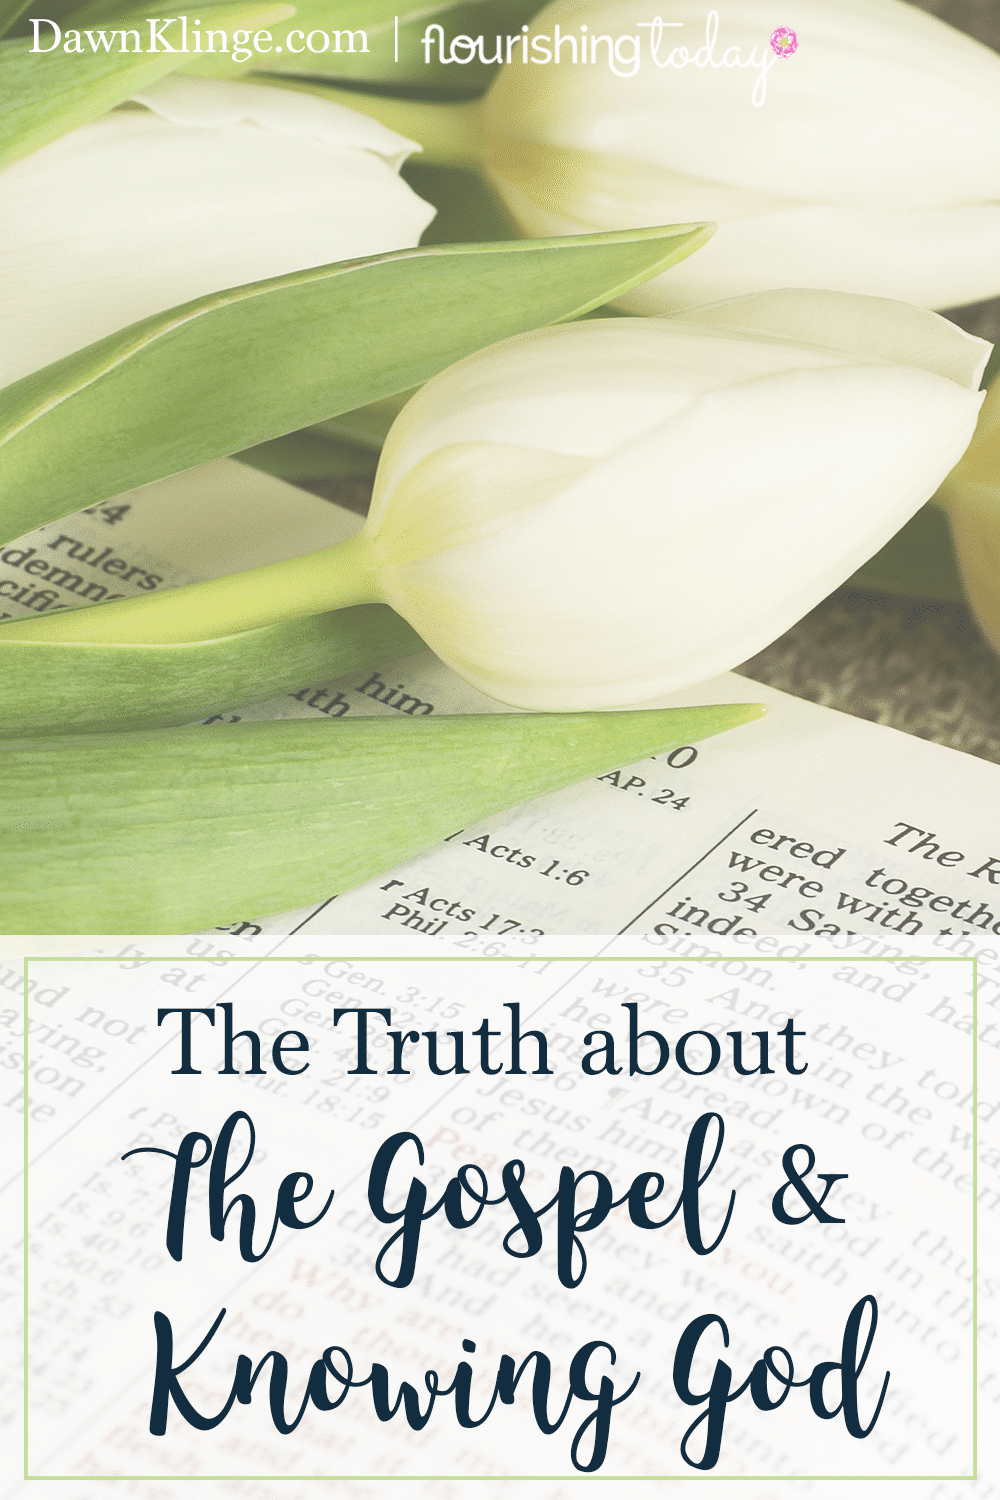 Do you want to know more about who God is? When we learn the truth about the gospel, we gain greater insight into who the Father is. 